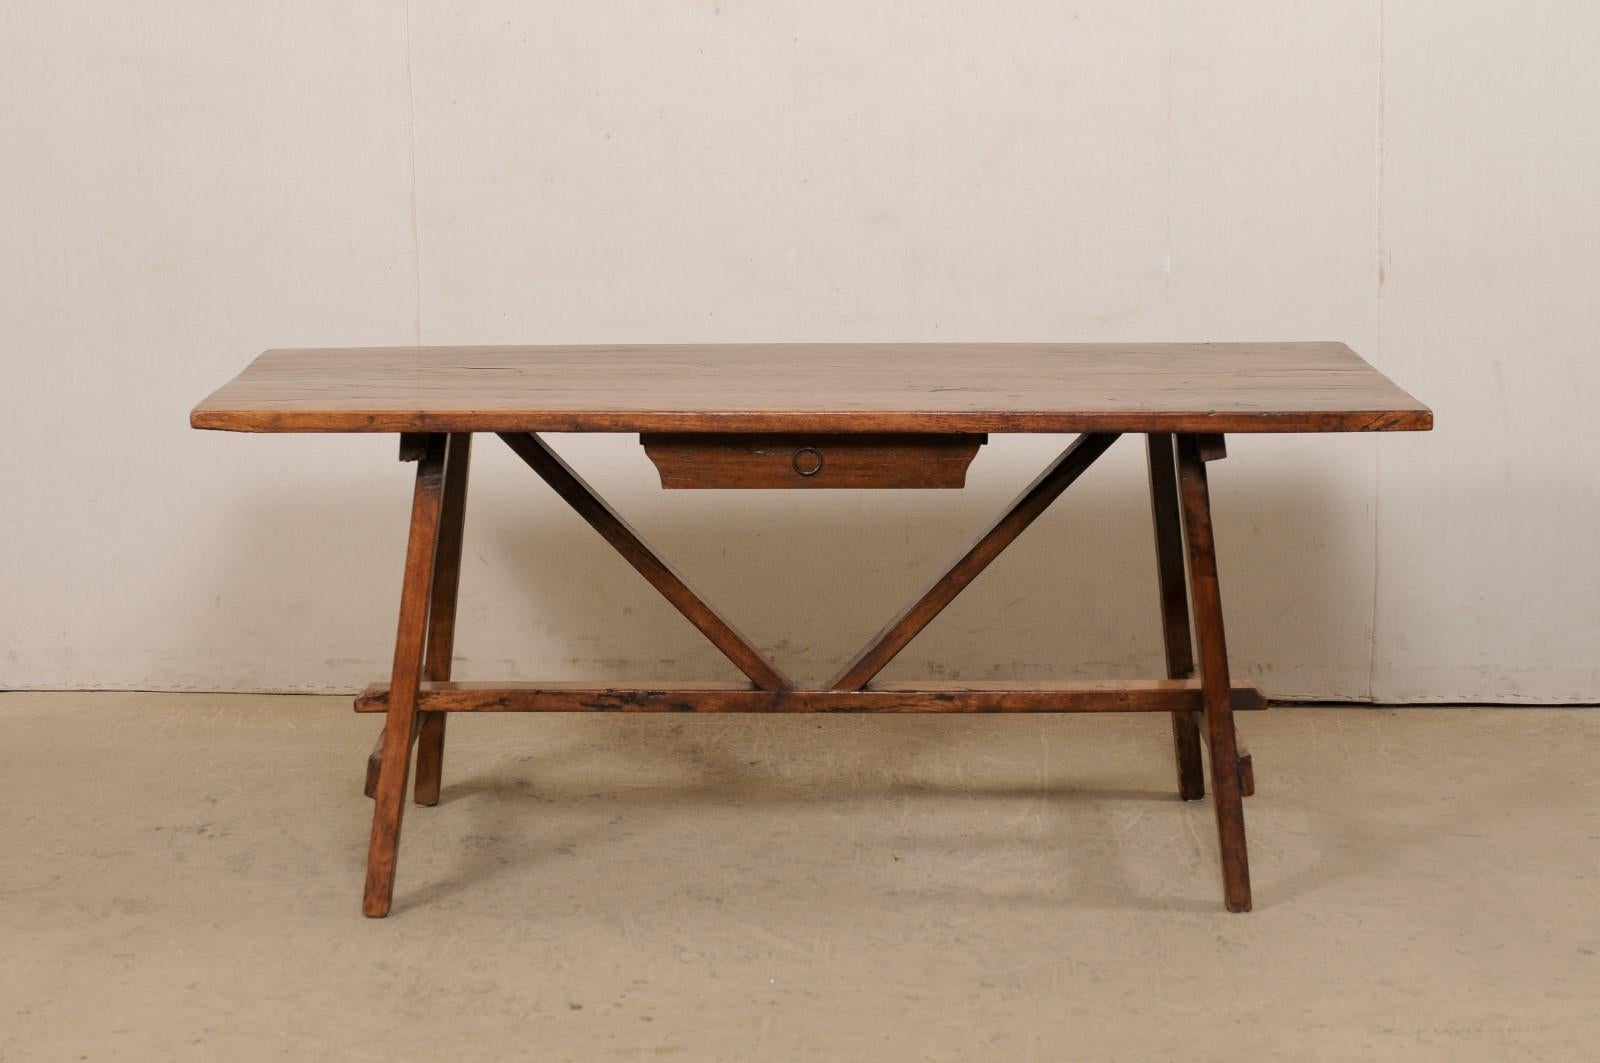 Early 18th C. Italian Walnut Table with V-Stretcher, a Great Desk Option 5